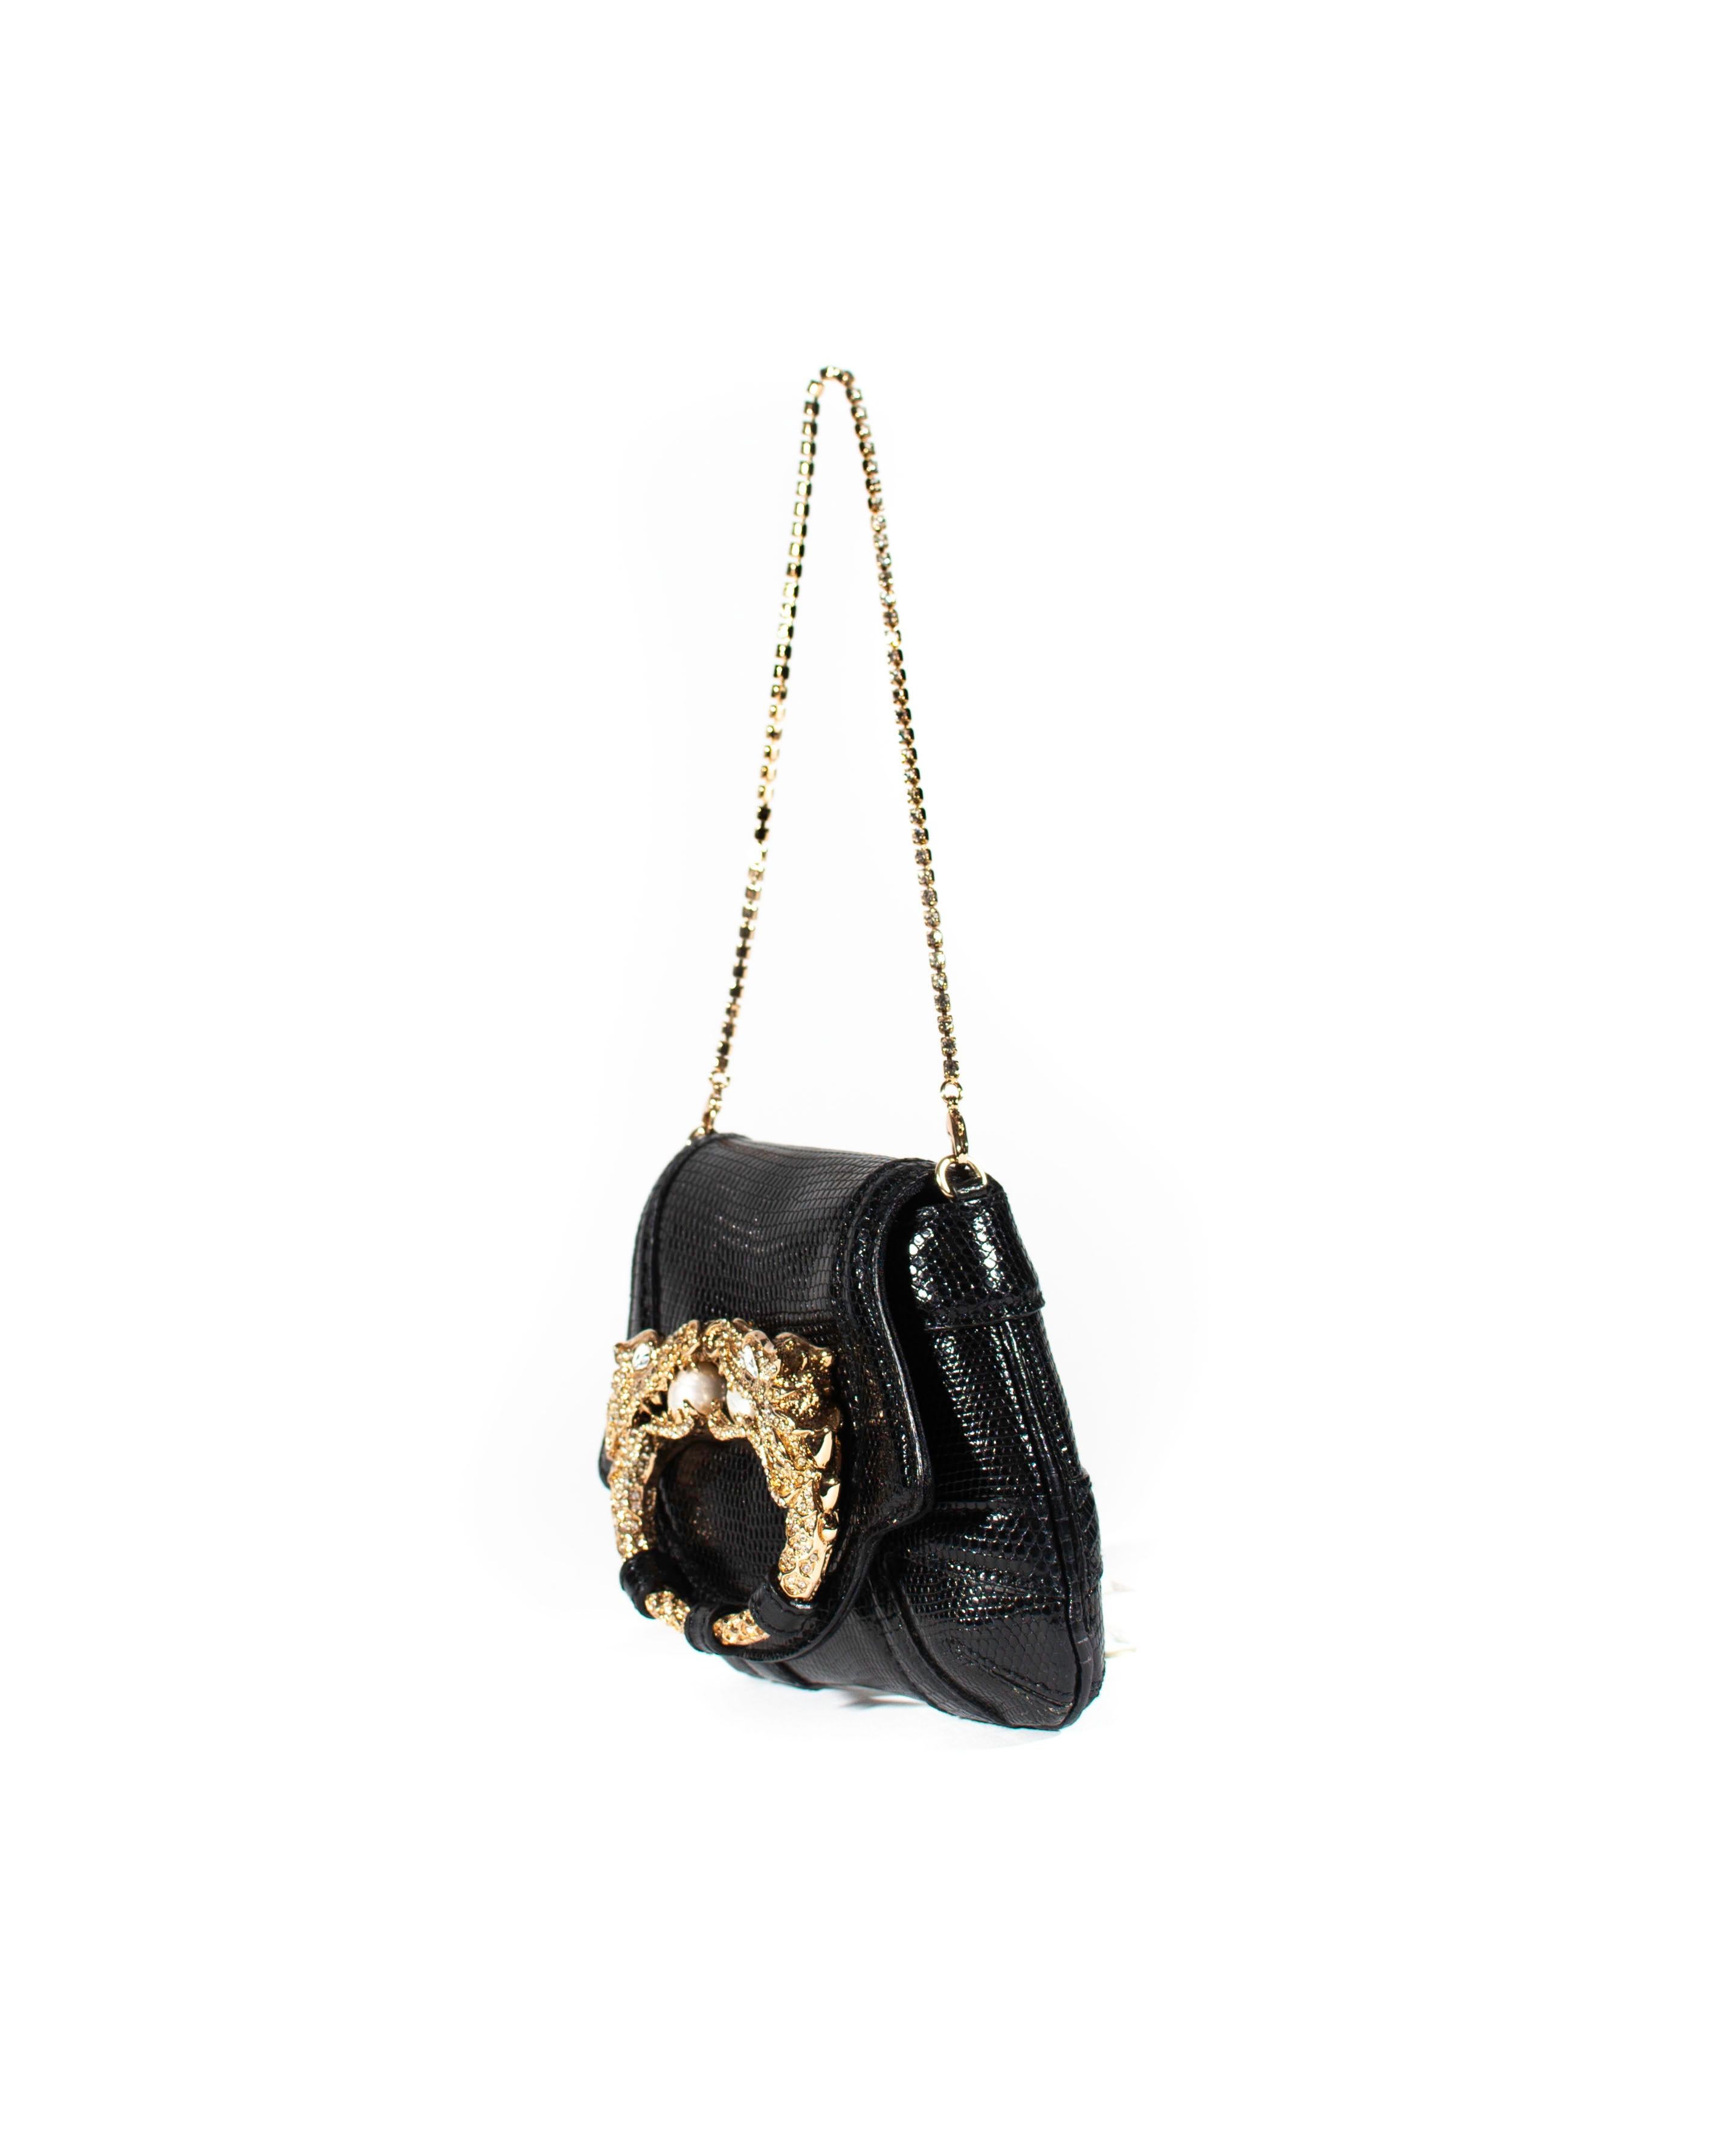 TheRealList presents: a fabulous black lizard skin mini F/W 2004 Gucci bag with a dragon accent, designed by Tom Ford. This petite bag can be used as a mini bag or as a clutch when the rhinestone chain handle is removed. The bag was debuted on the